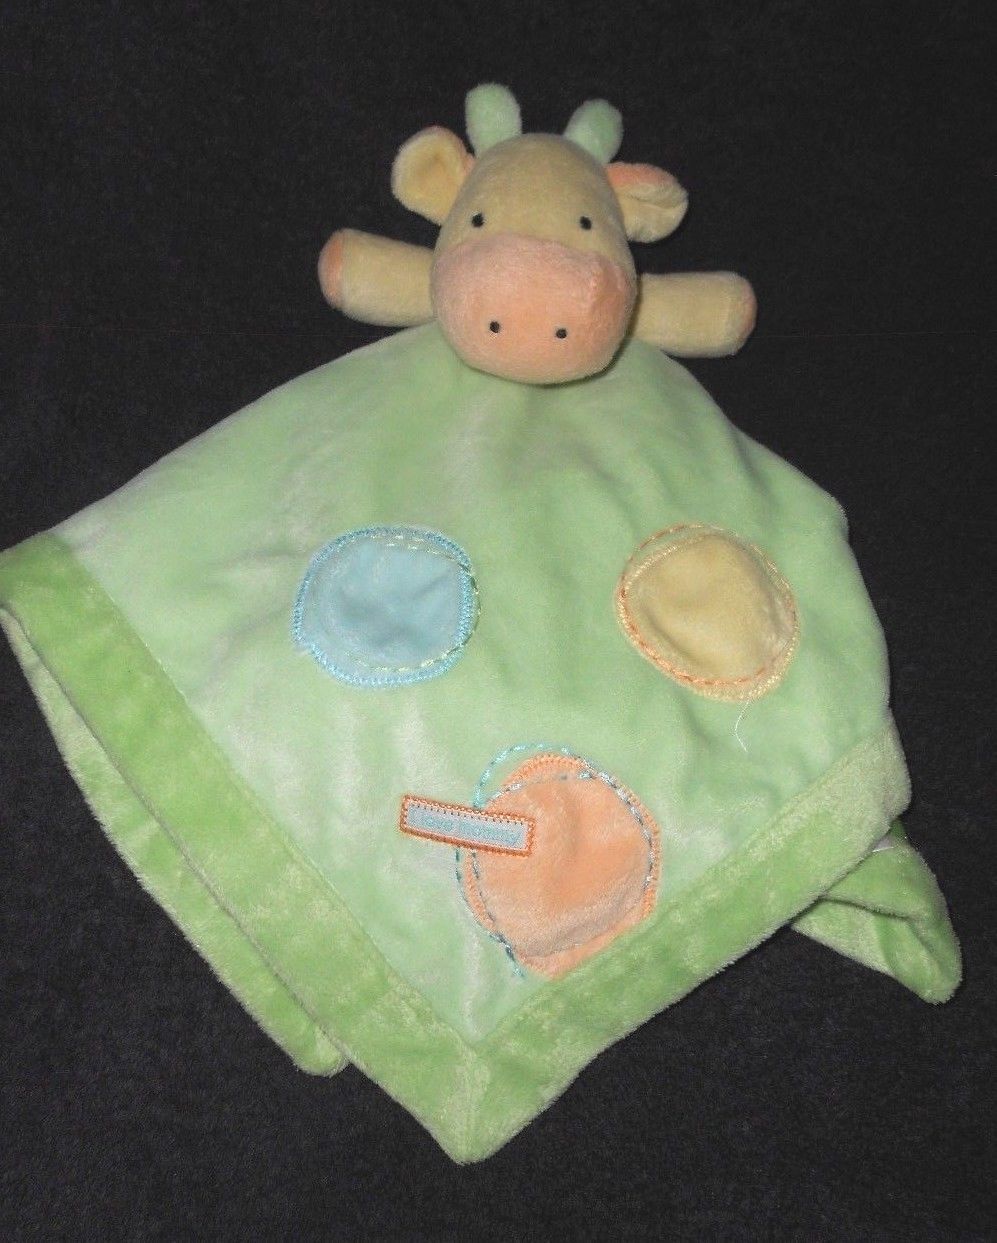 CARTERS SECURITY BLANKET FROG SMILE LOVEY RATTLE GREEN TAN BLANKEY UNISEX SOFT 